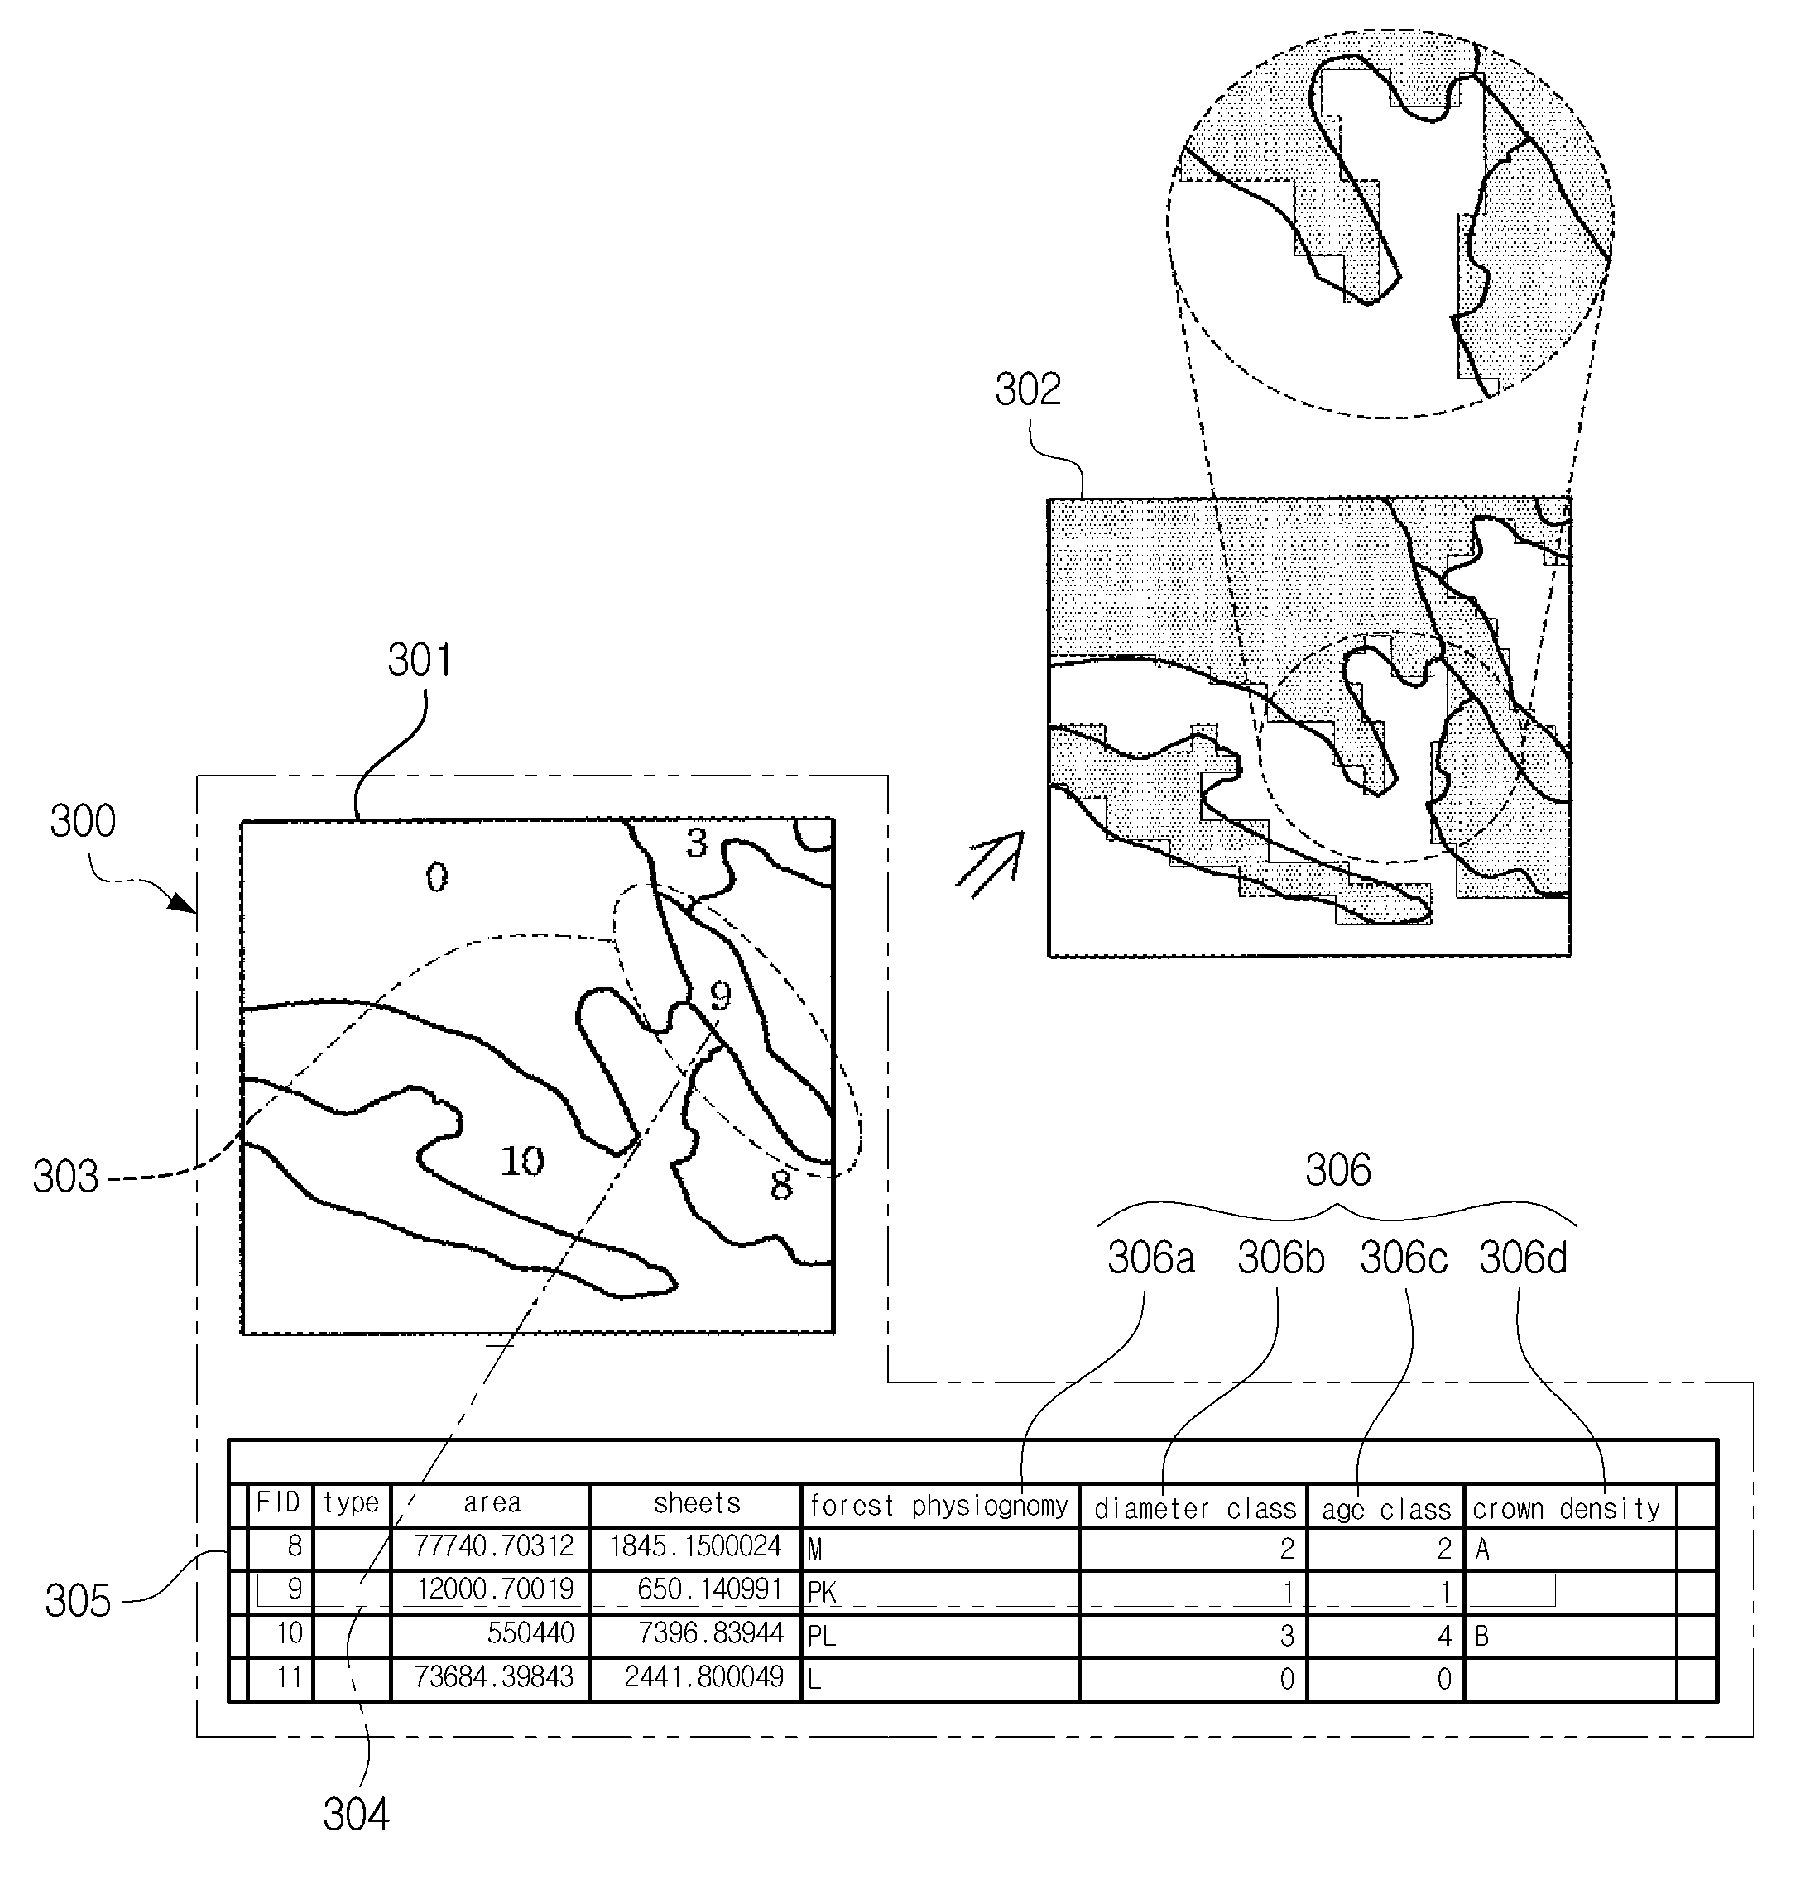 Method for quantifying plant resources using gis